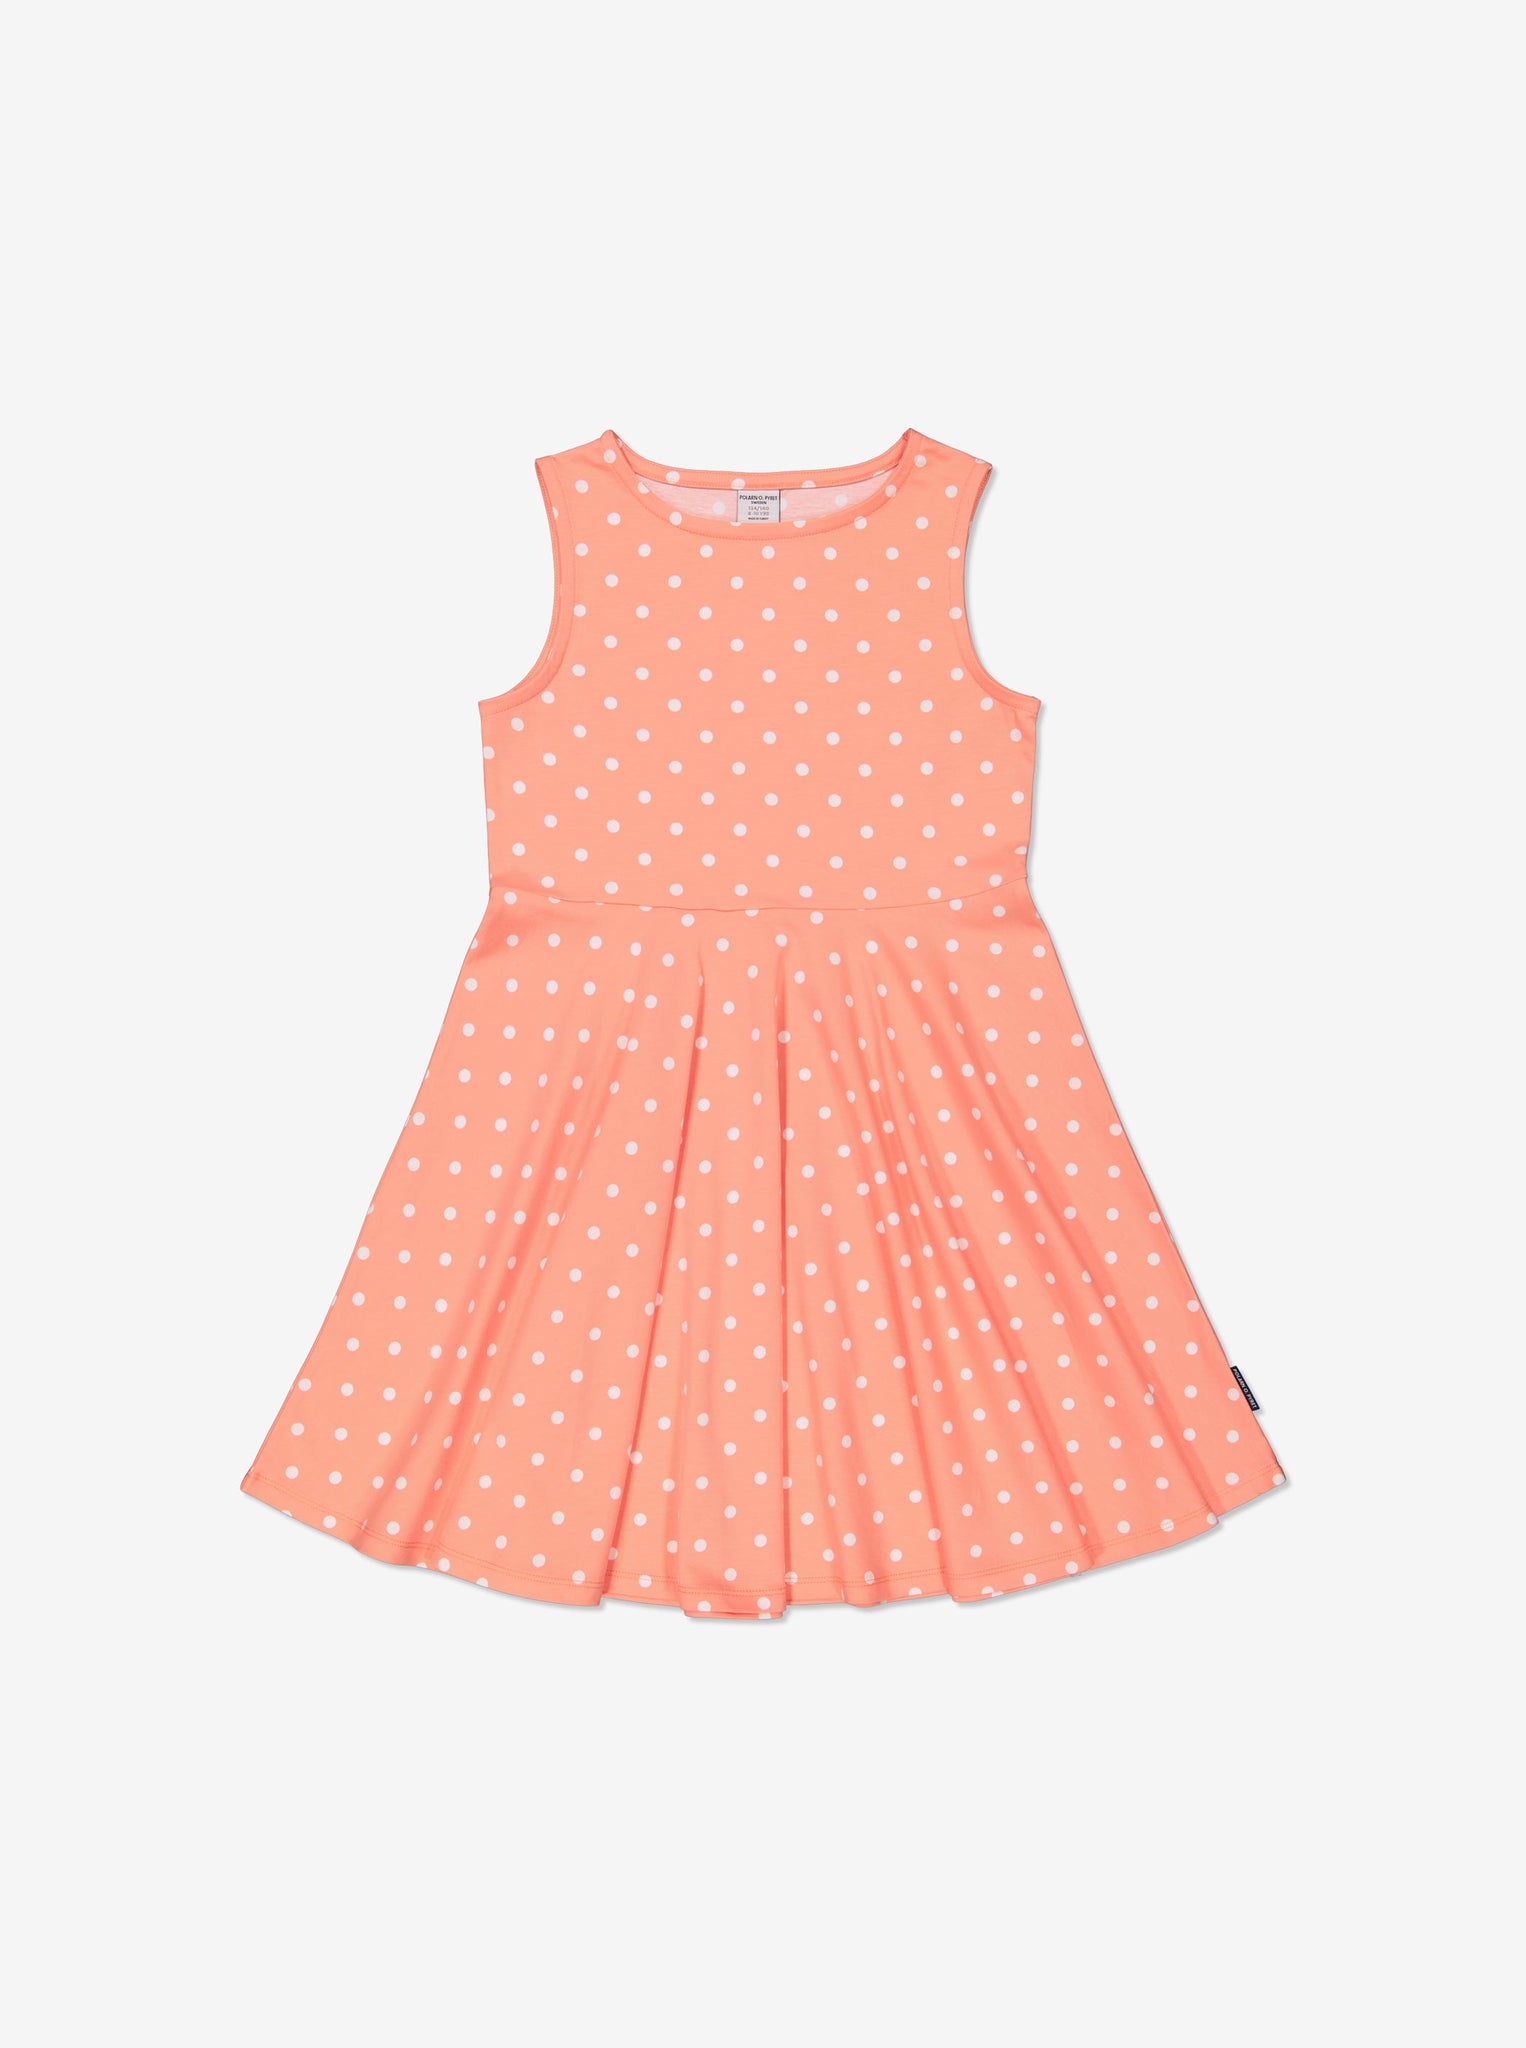 Peach Polka Dot Girls Dress from Polarn O. Pyret Kidswear. Ethically made and sustainably sourced materials.